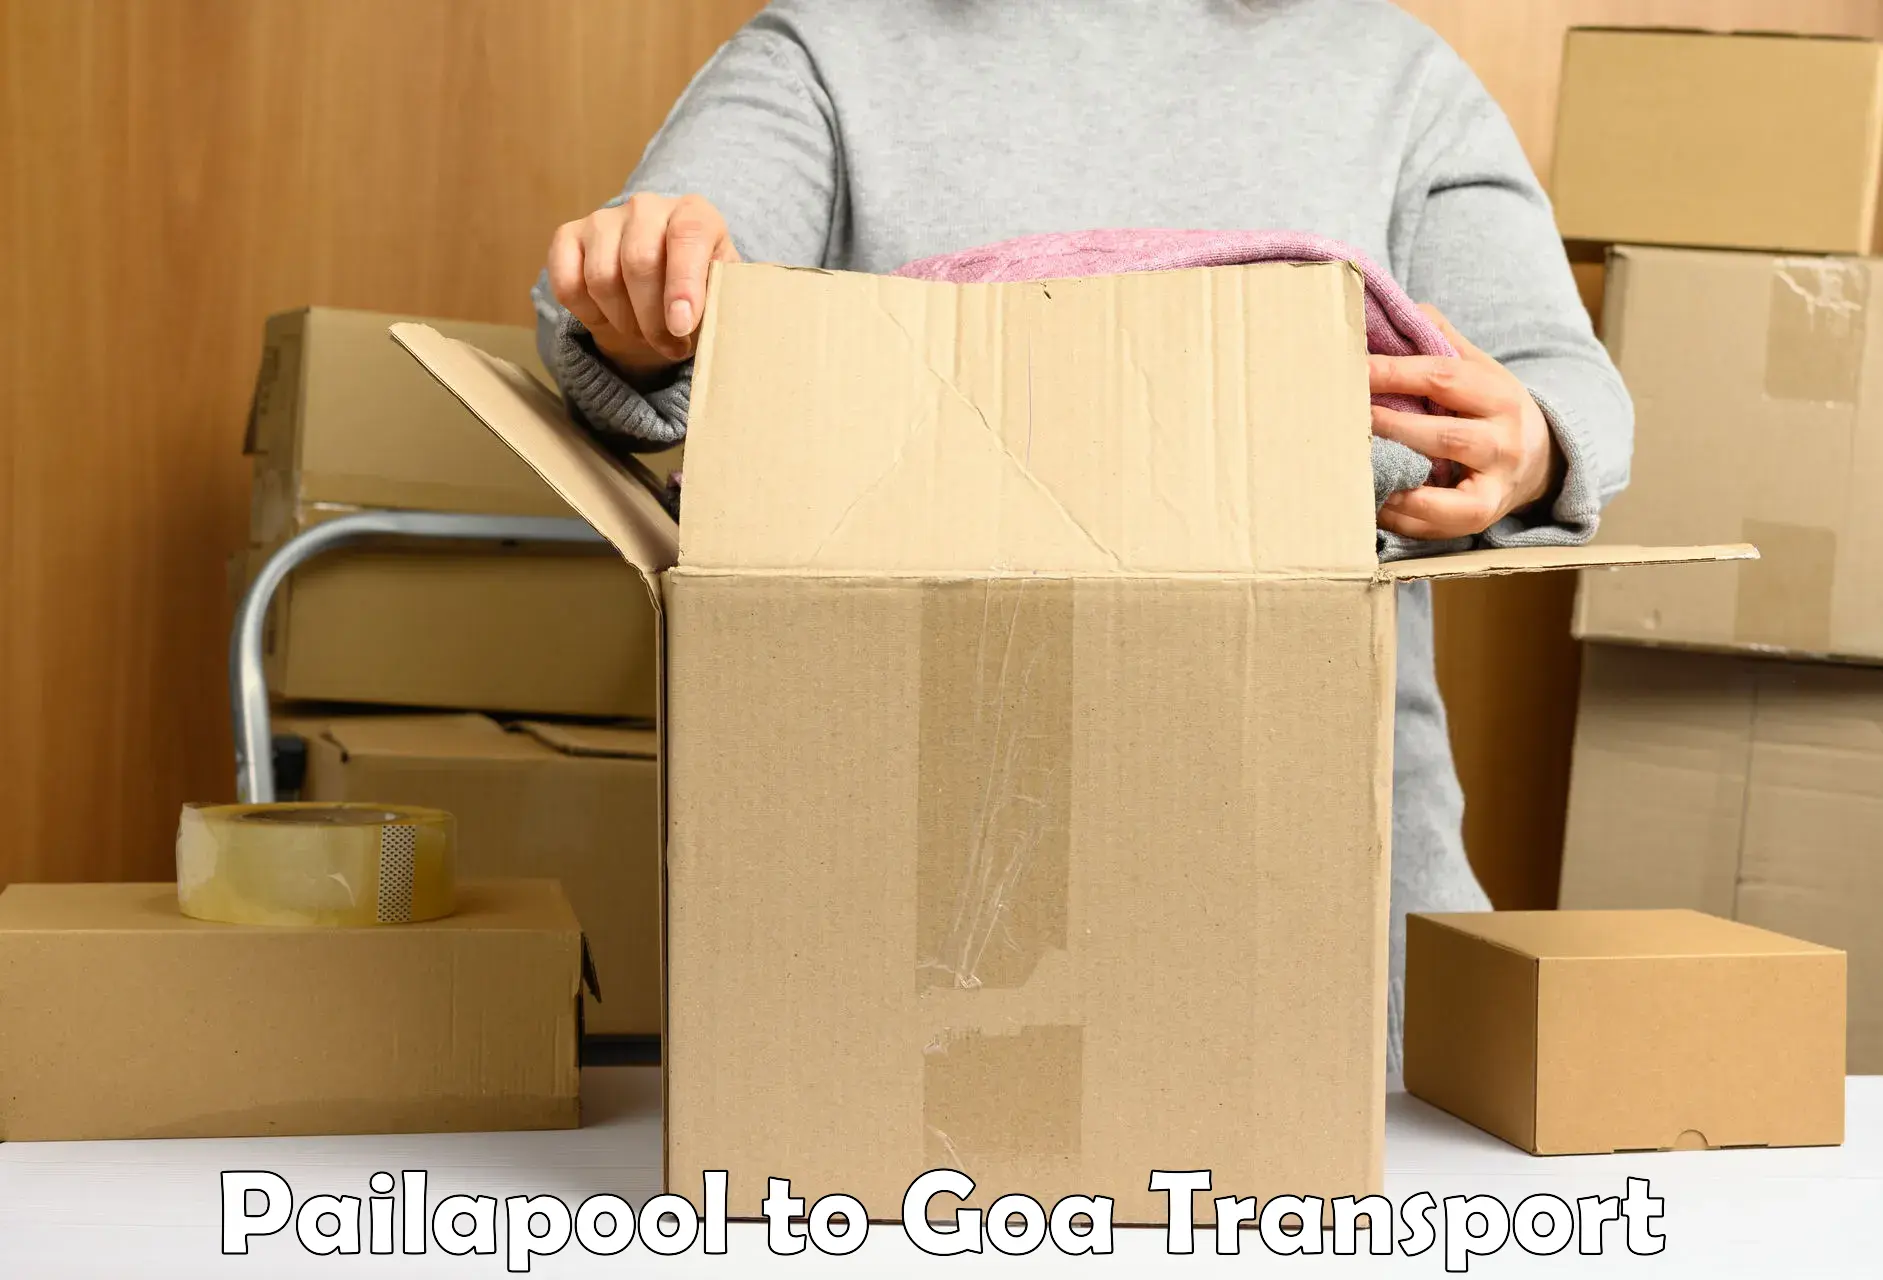 Daily transport service Pailapool to South Goa